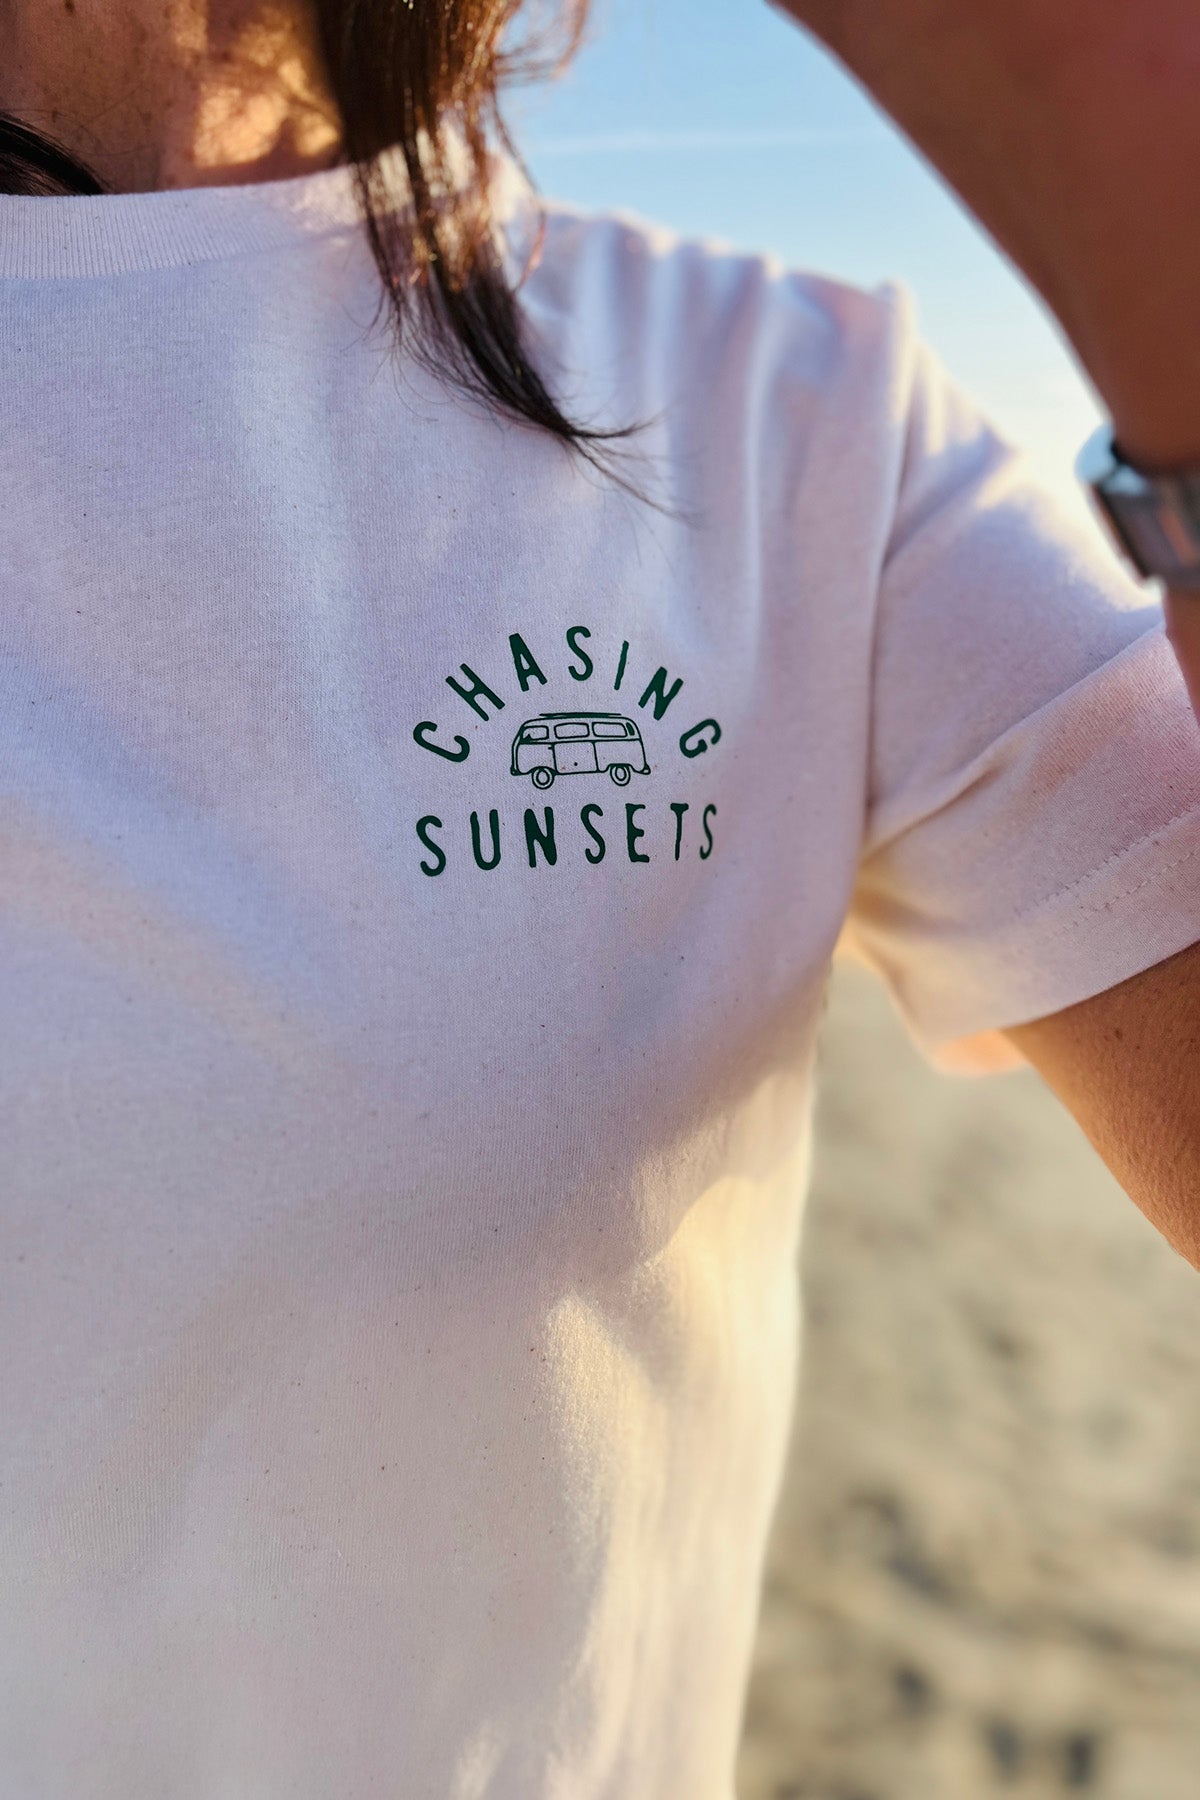 Tee "Chasing Sunsets"